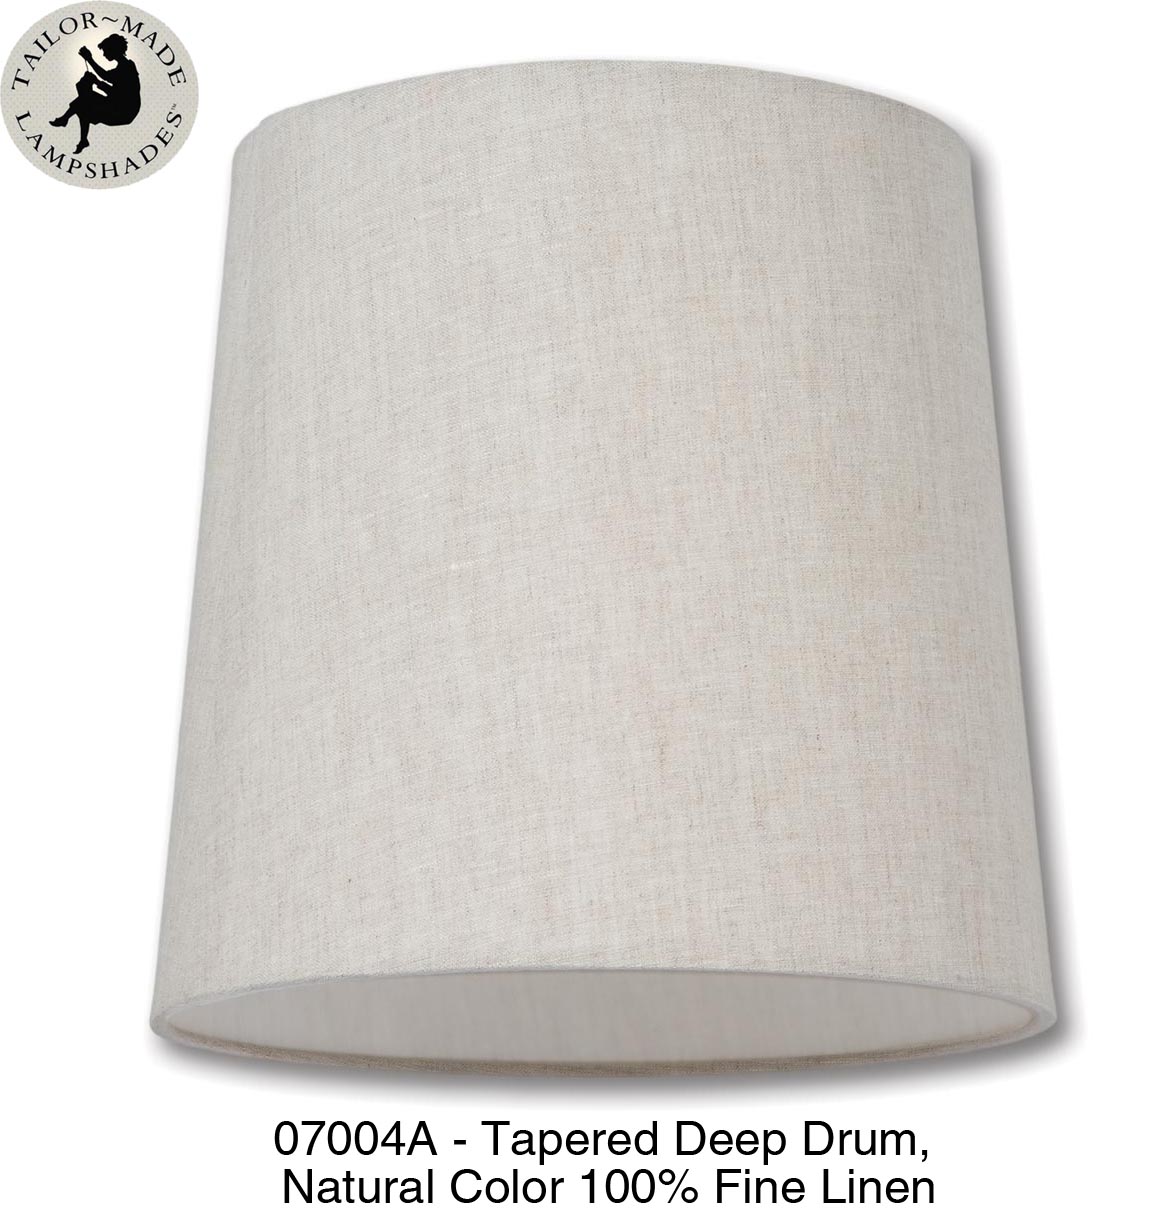 Tapered Deep Drum Lamp Shades - Off White Color, 100% Fine Linen Material